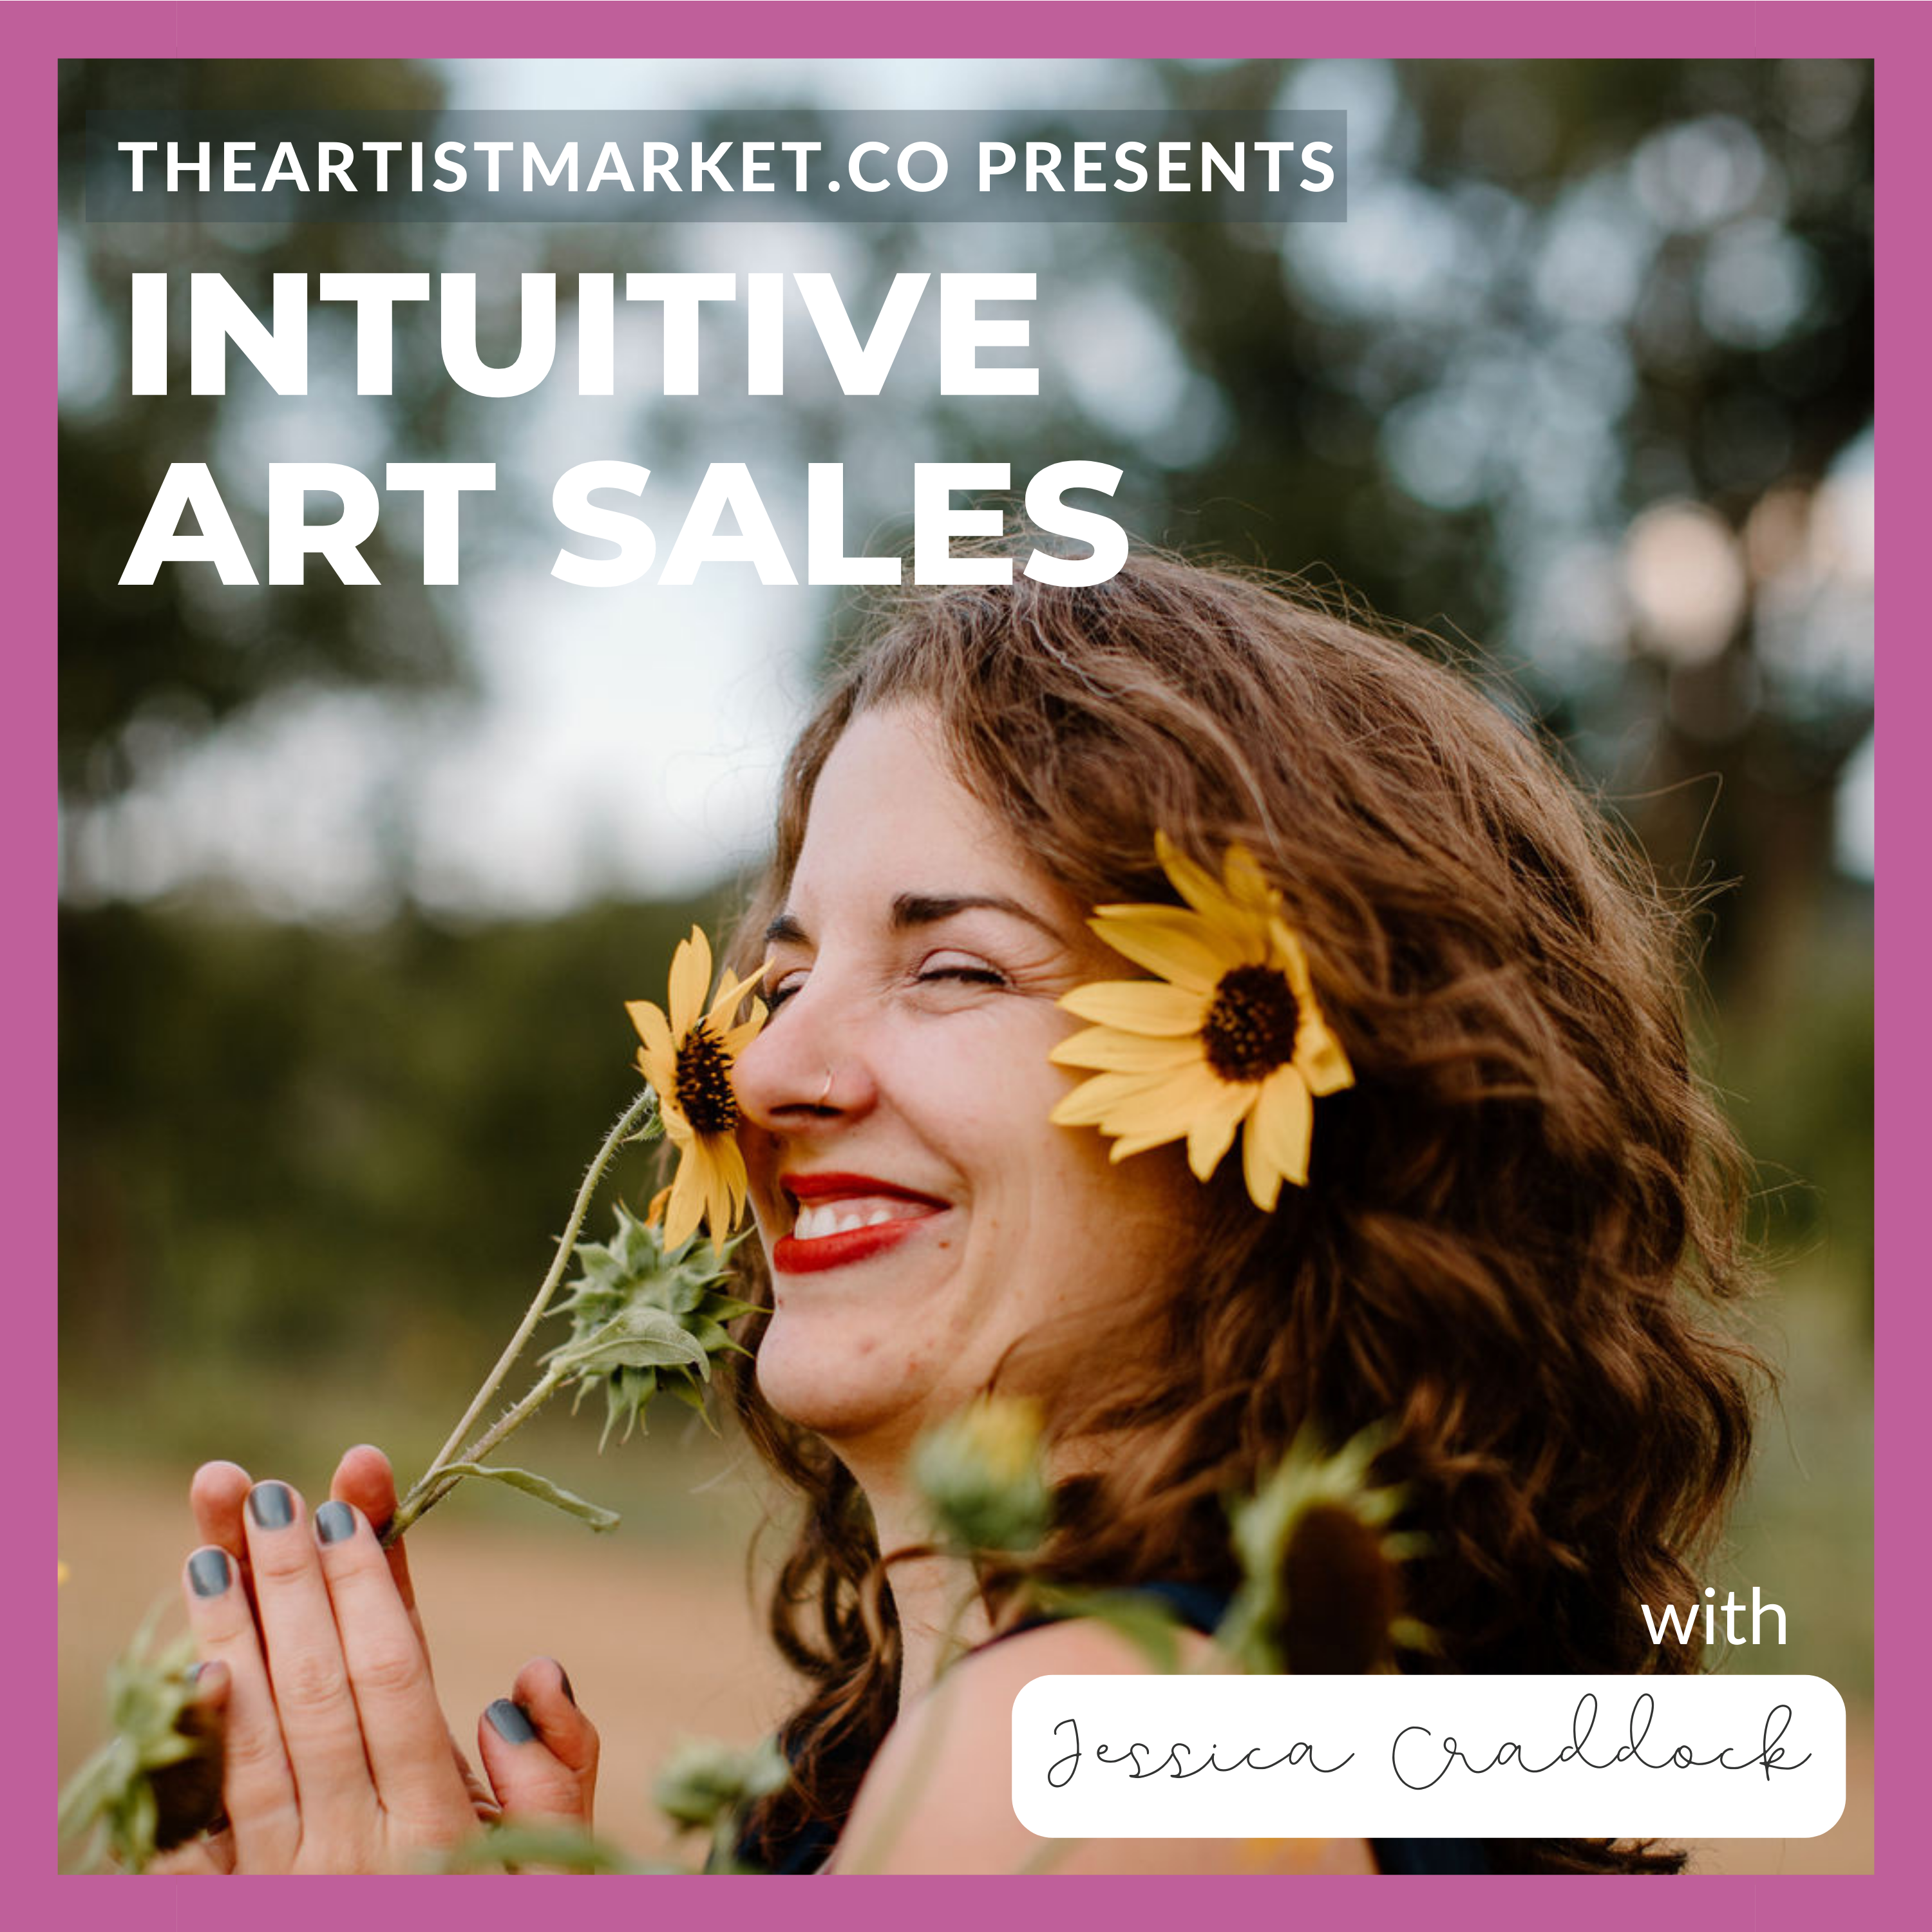 "How can I make more connections to create opportunities for my art business?" - Laurie Baars E67